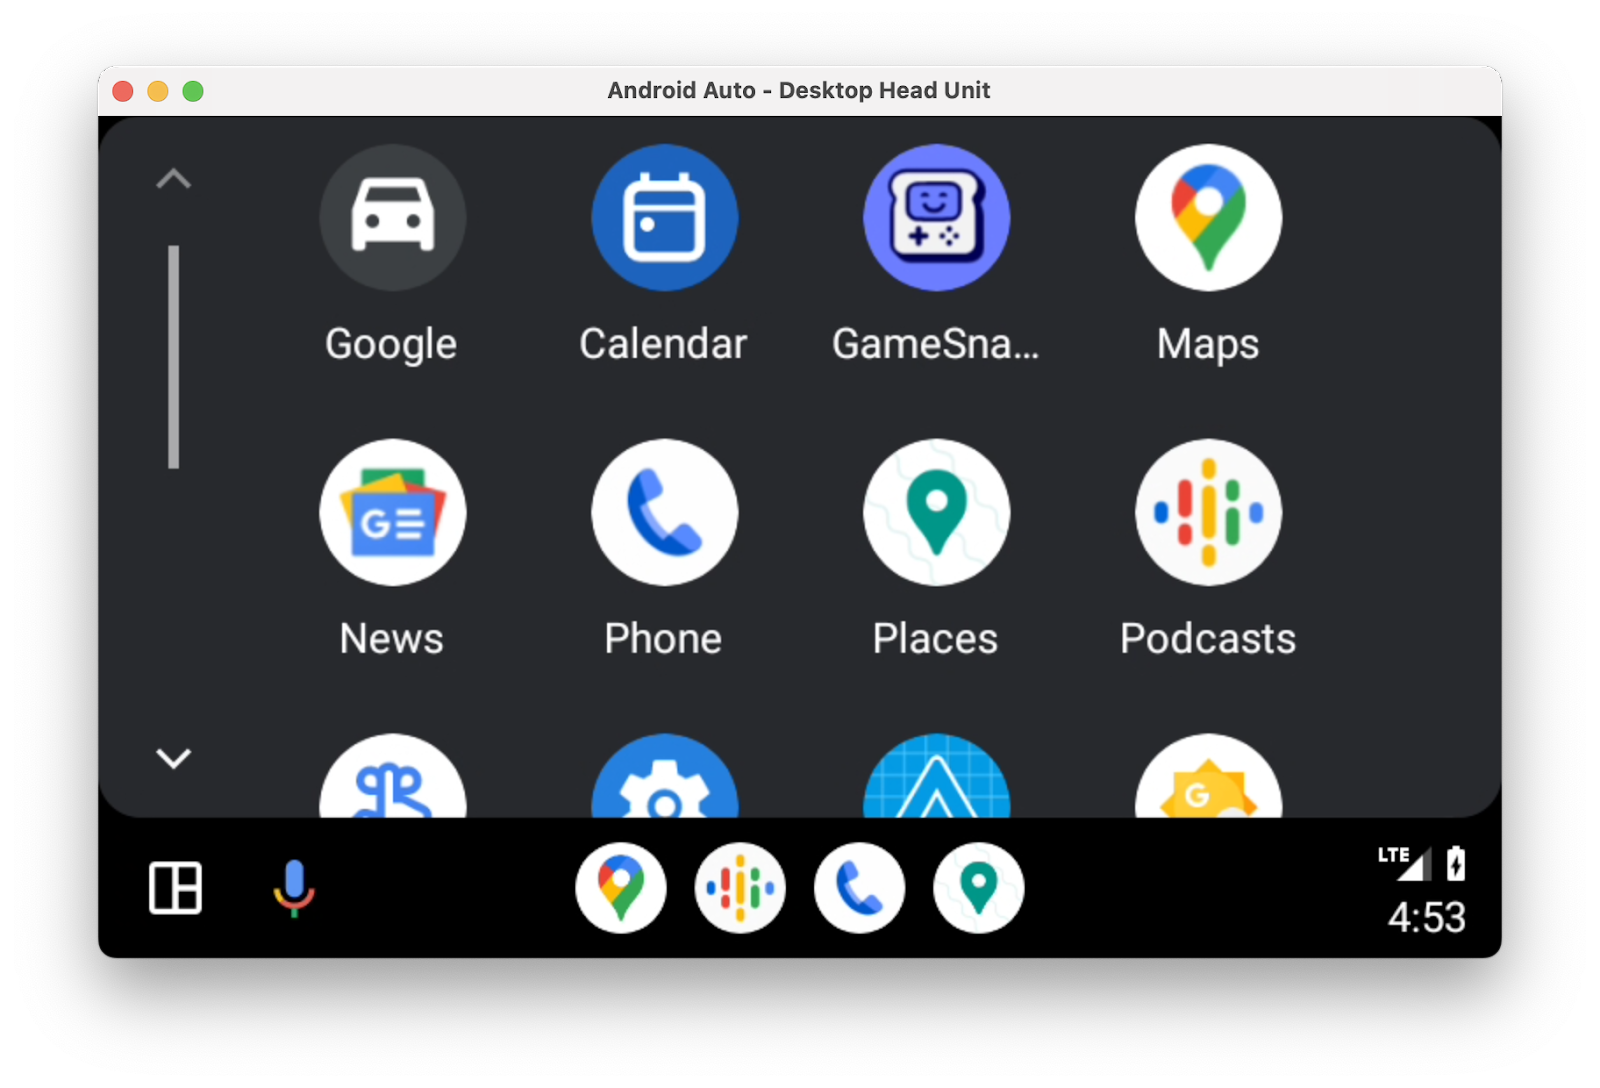 The Android Auto launcher showing the app grid, including the Places app.